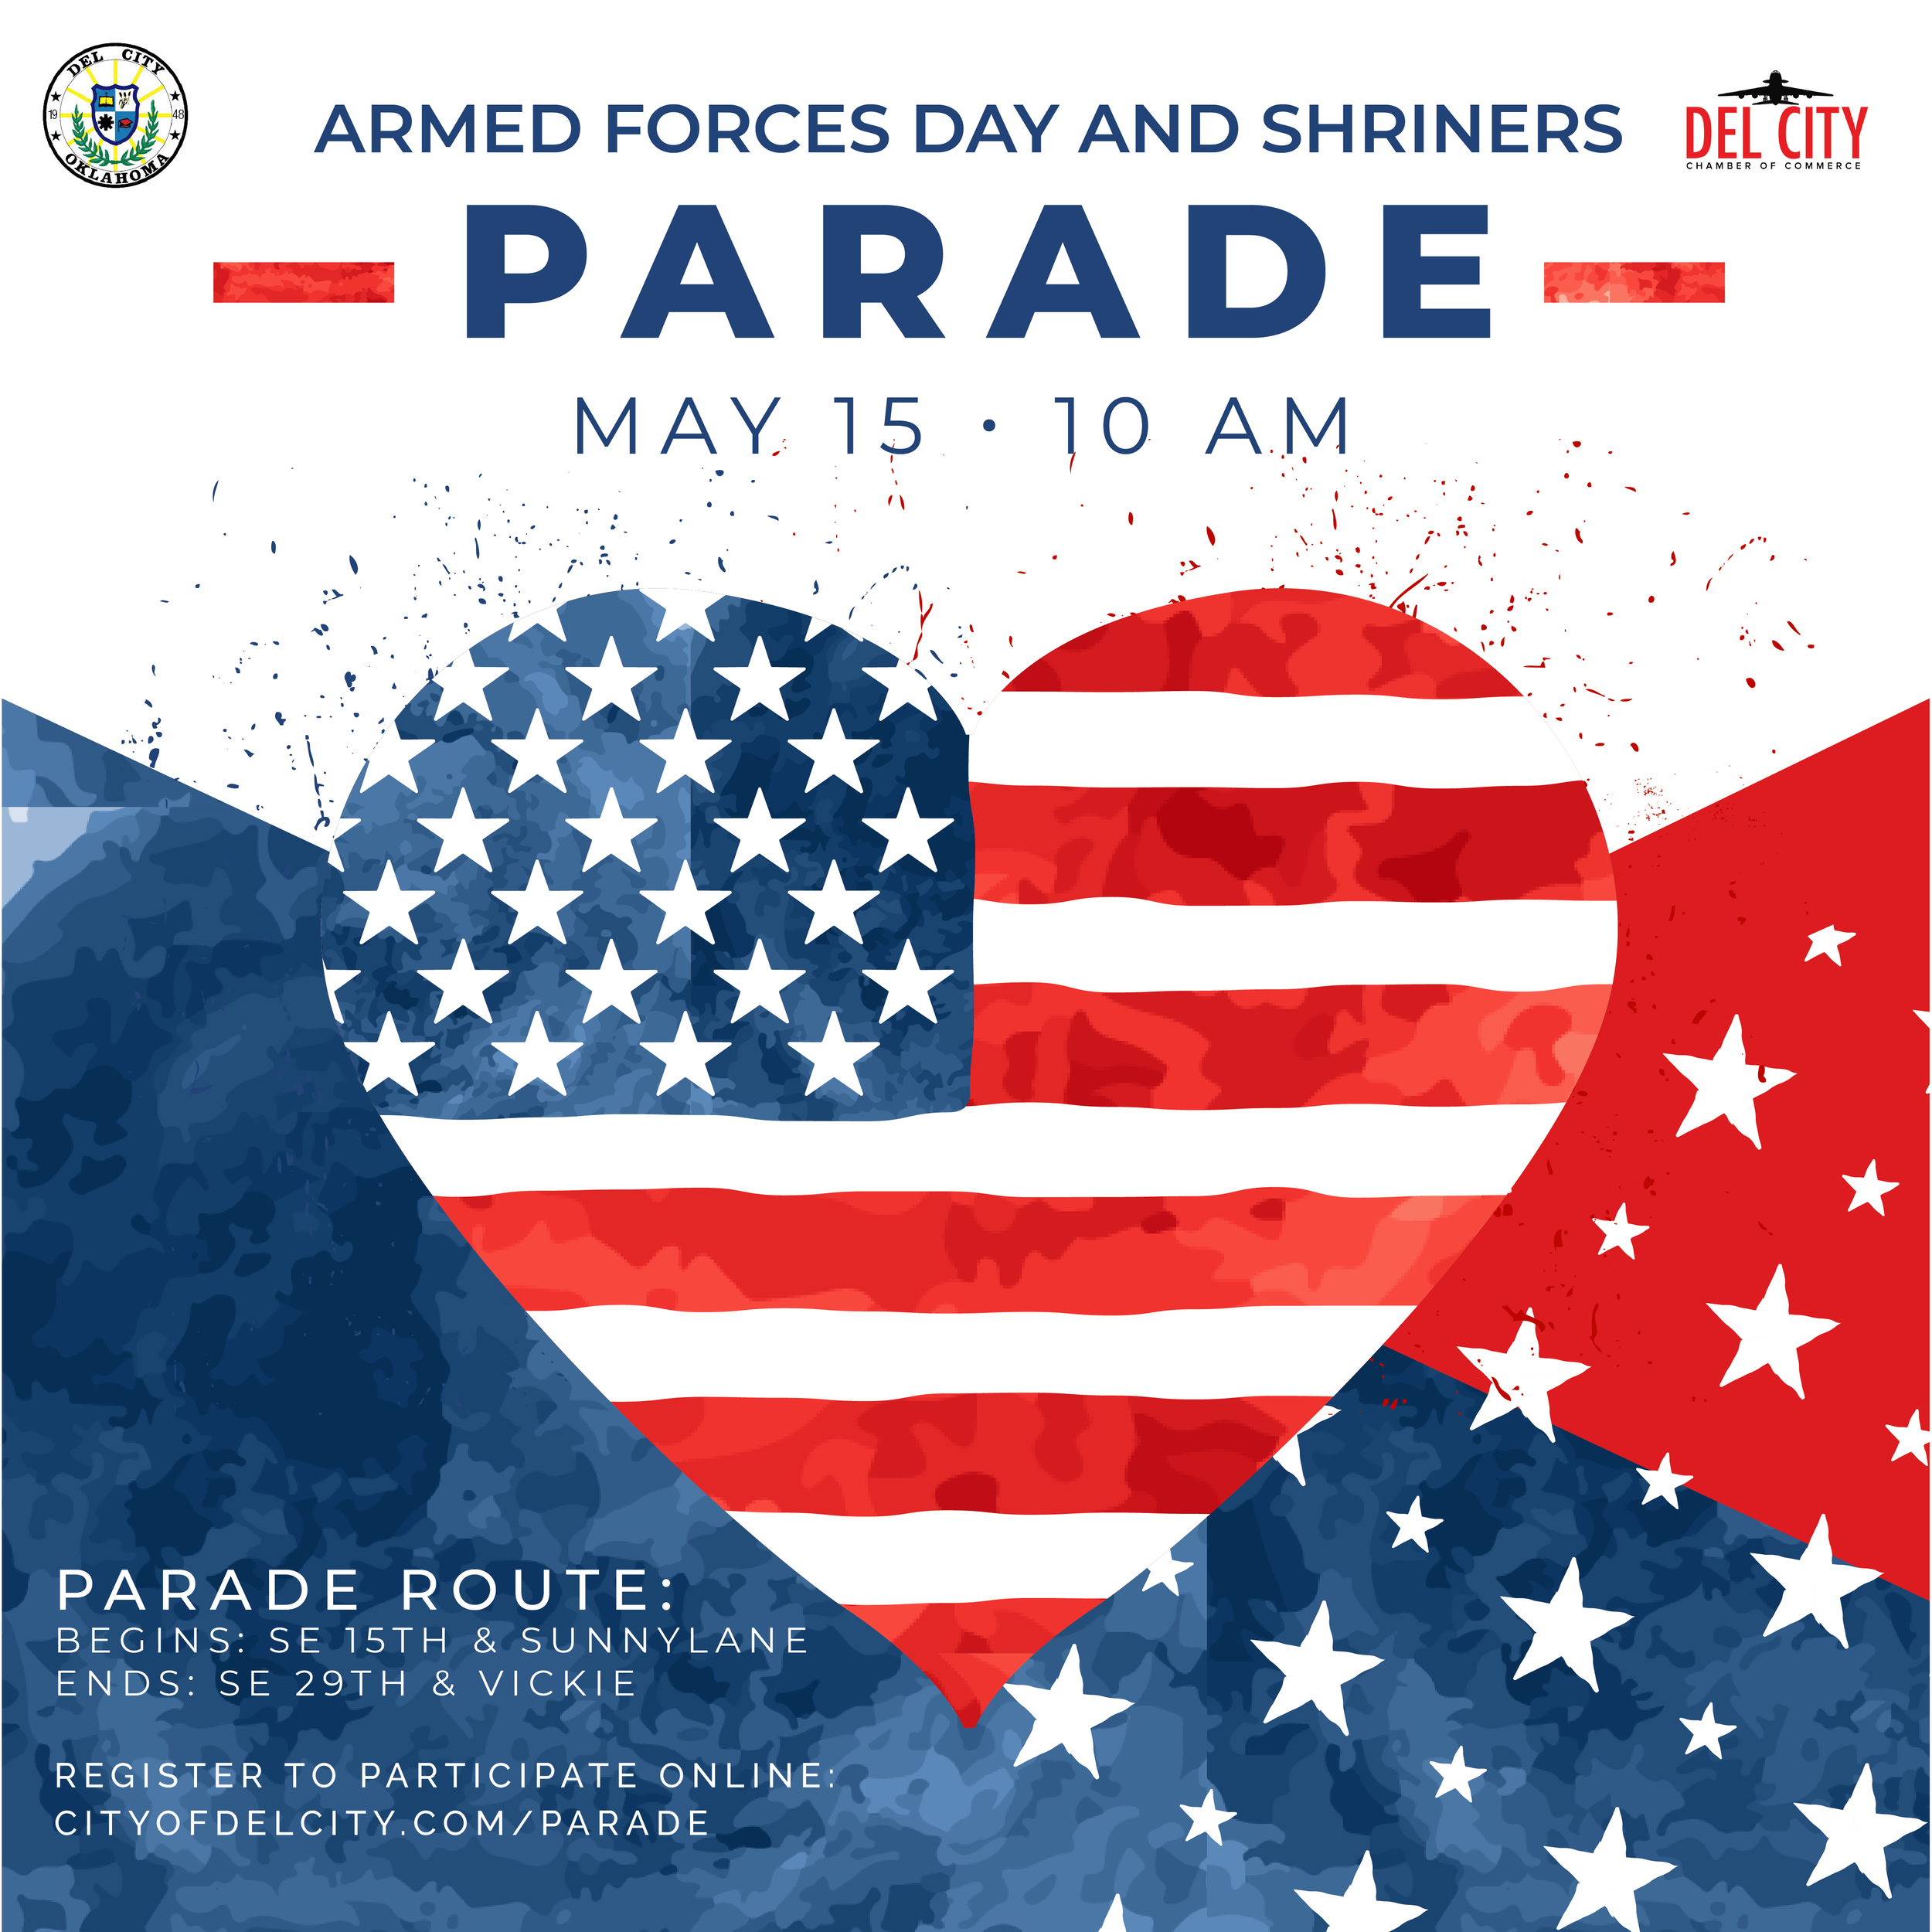 Armed Forces Day Parade Returns May 15, 2021 — Del City Chamber of